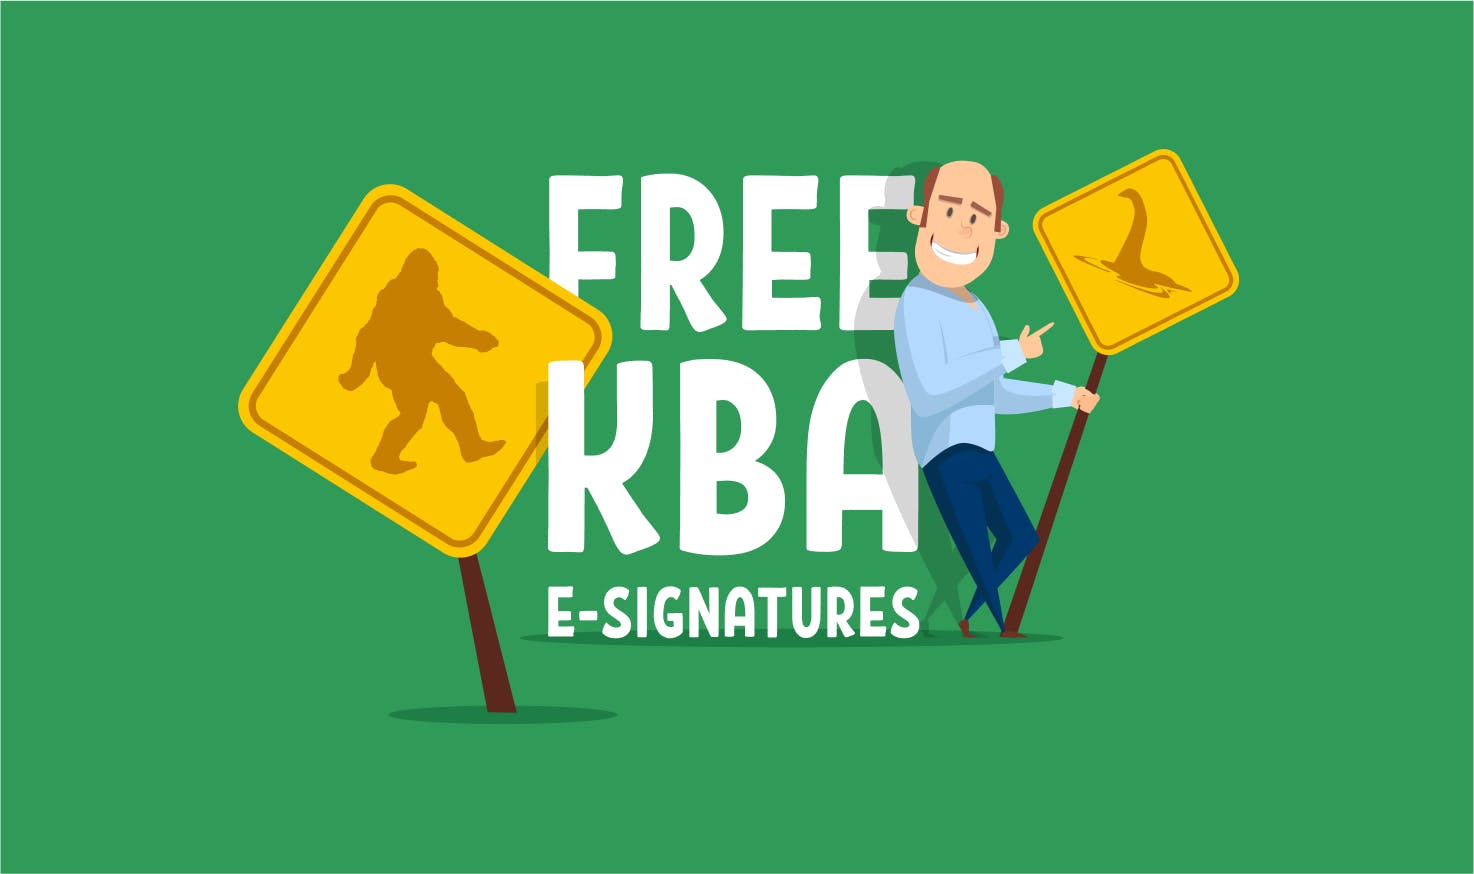 Free KBA: is there such a thing?